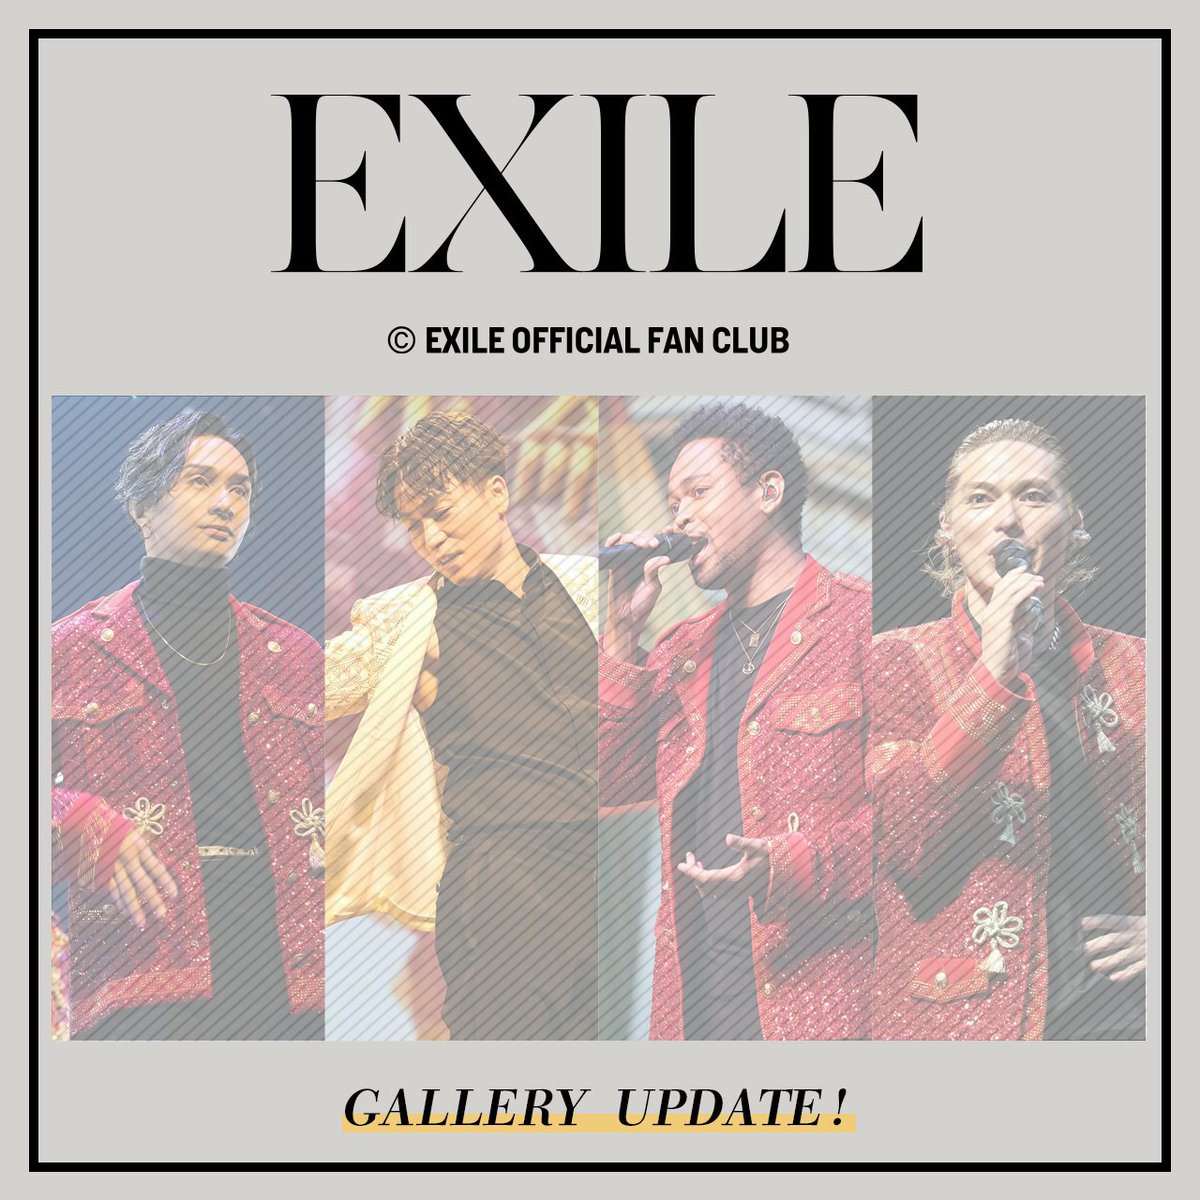 ／ #EXILEOFFICIALFANCLUB 限定 GALLERY更新📸 ＼ 2023/12/9(土)に開催された 『EXILE LIVE 2023 in TAIPEI』のLIVE PHOTOを公開！ 本日は… 橘ケンチ, EXILE TETSUYA, EXILE NESMITH & EXILE SHOKICHIのLIVE PHOTOをUP！ 是非チェックしてください！ exile.exfamily.jp/s/ldh01/diary/… @LDHofficialMB